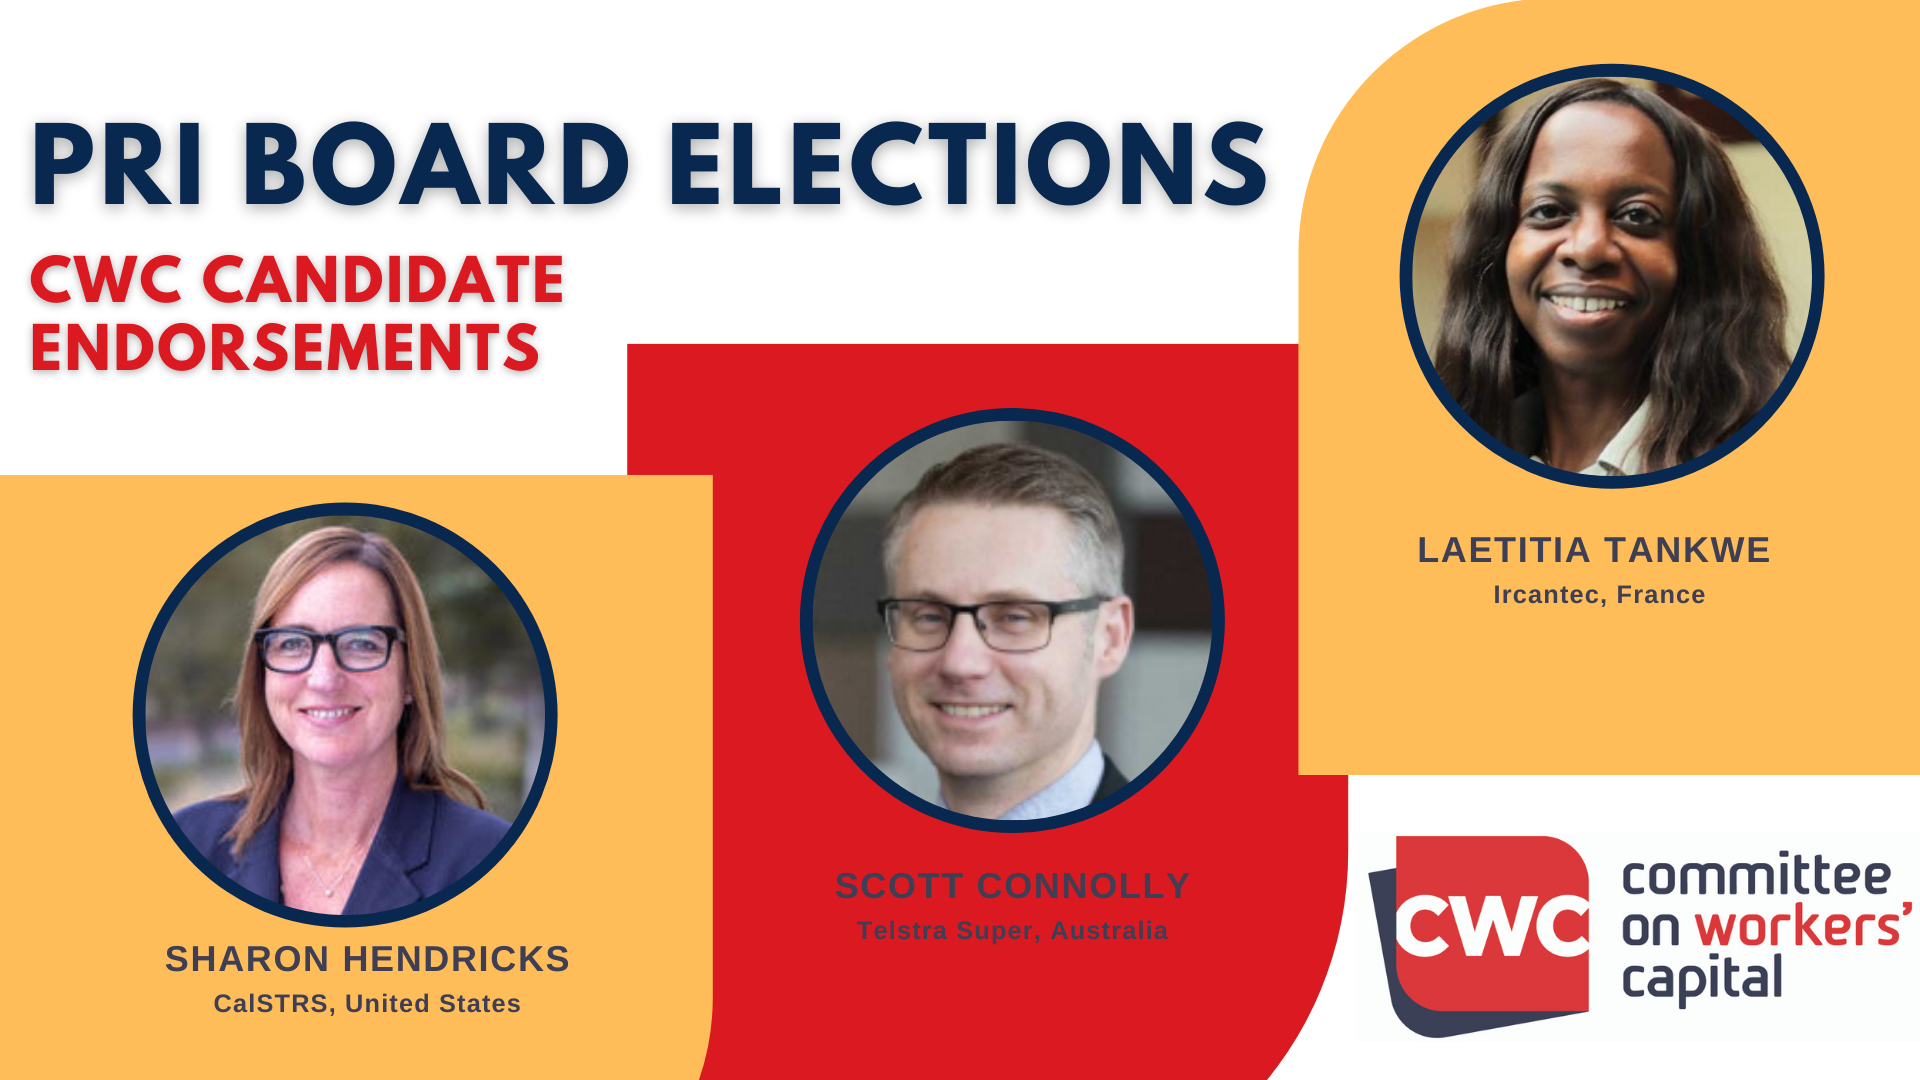 CWC endorses three PRI board asset owner candidates in 2021 election 